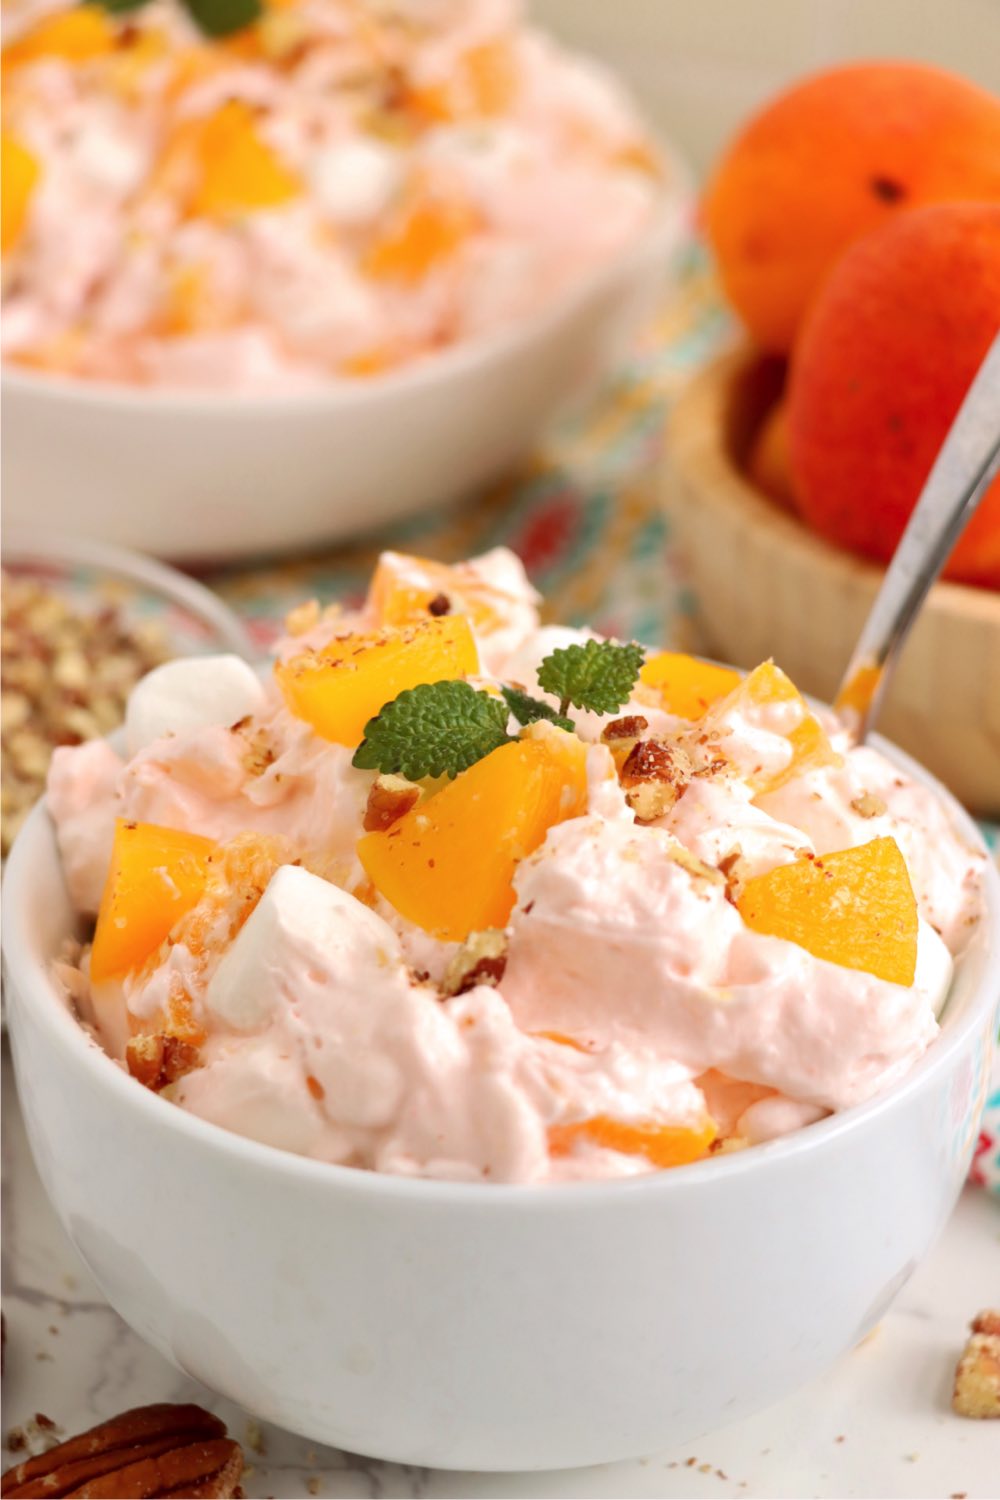 small bowl with a spoon filled with a peach fluff salad.